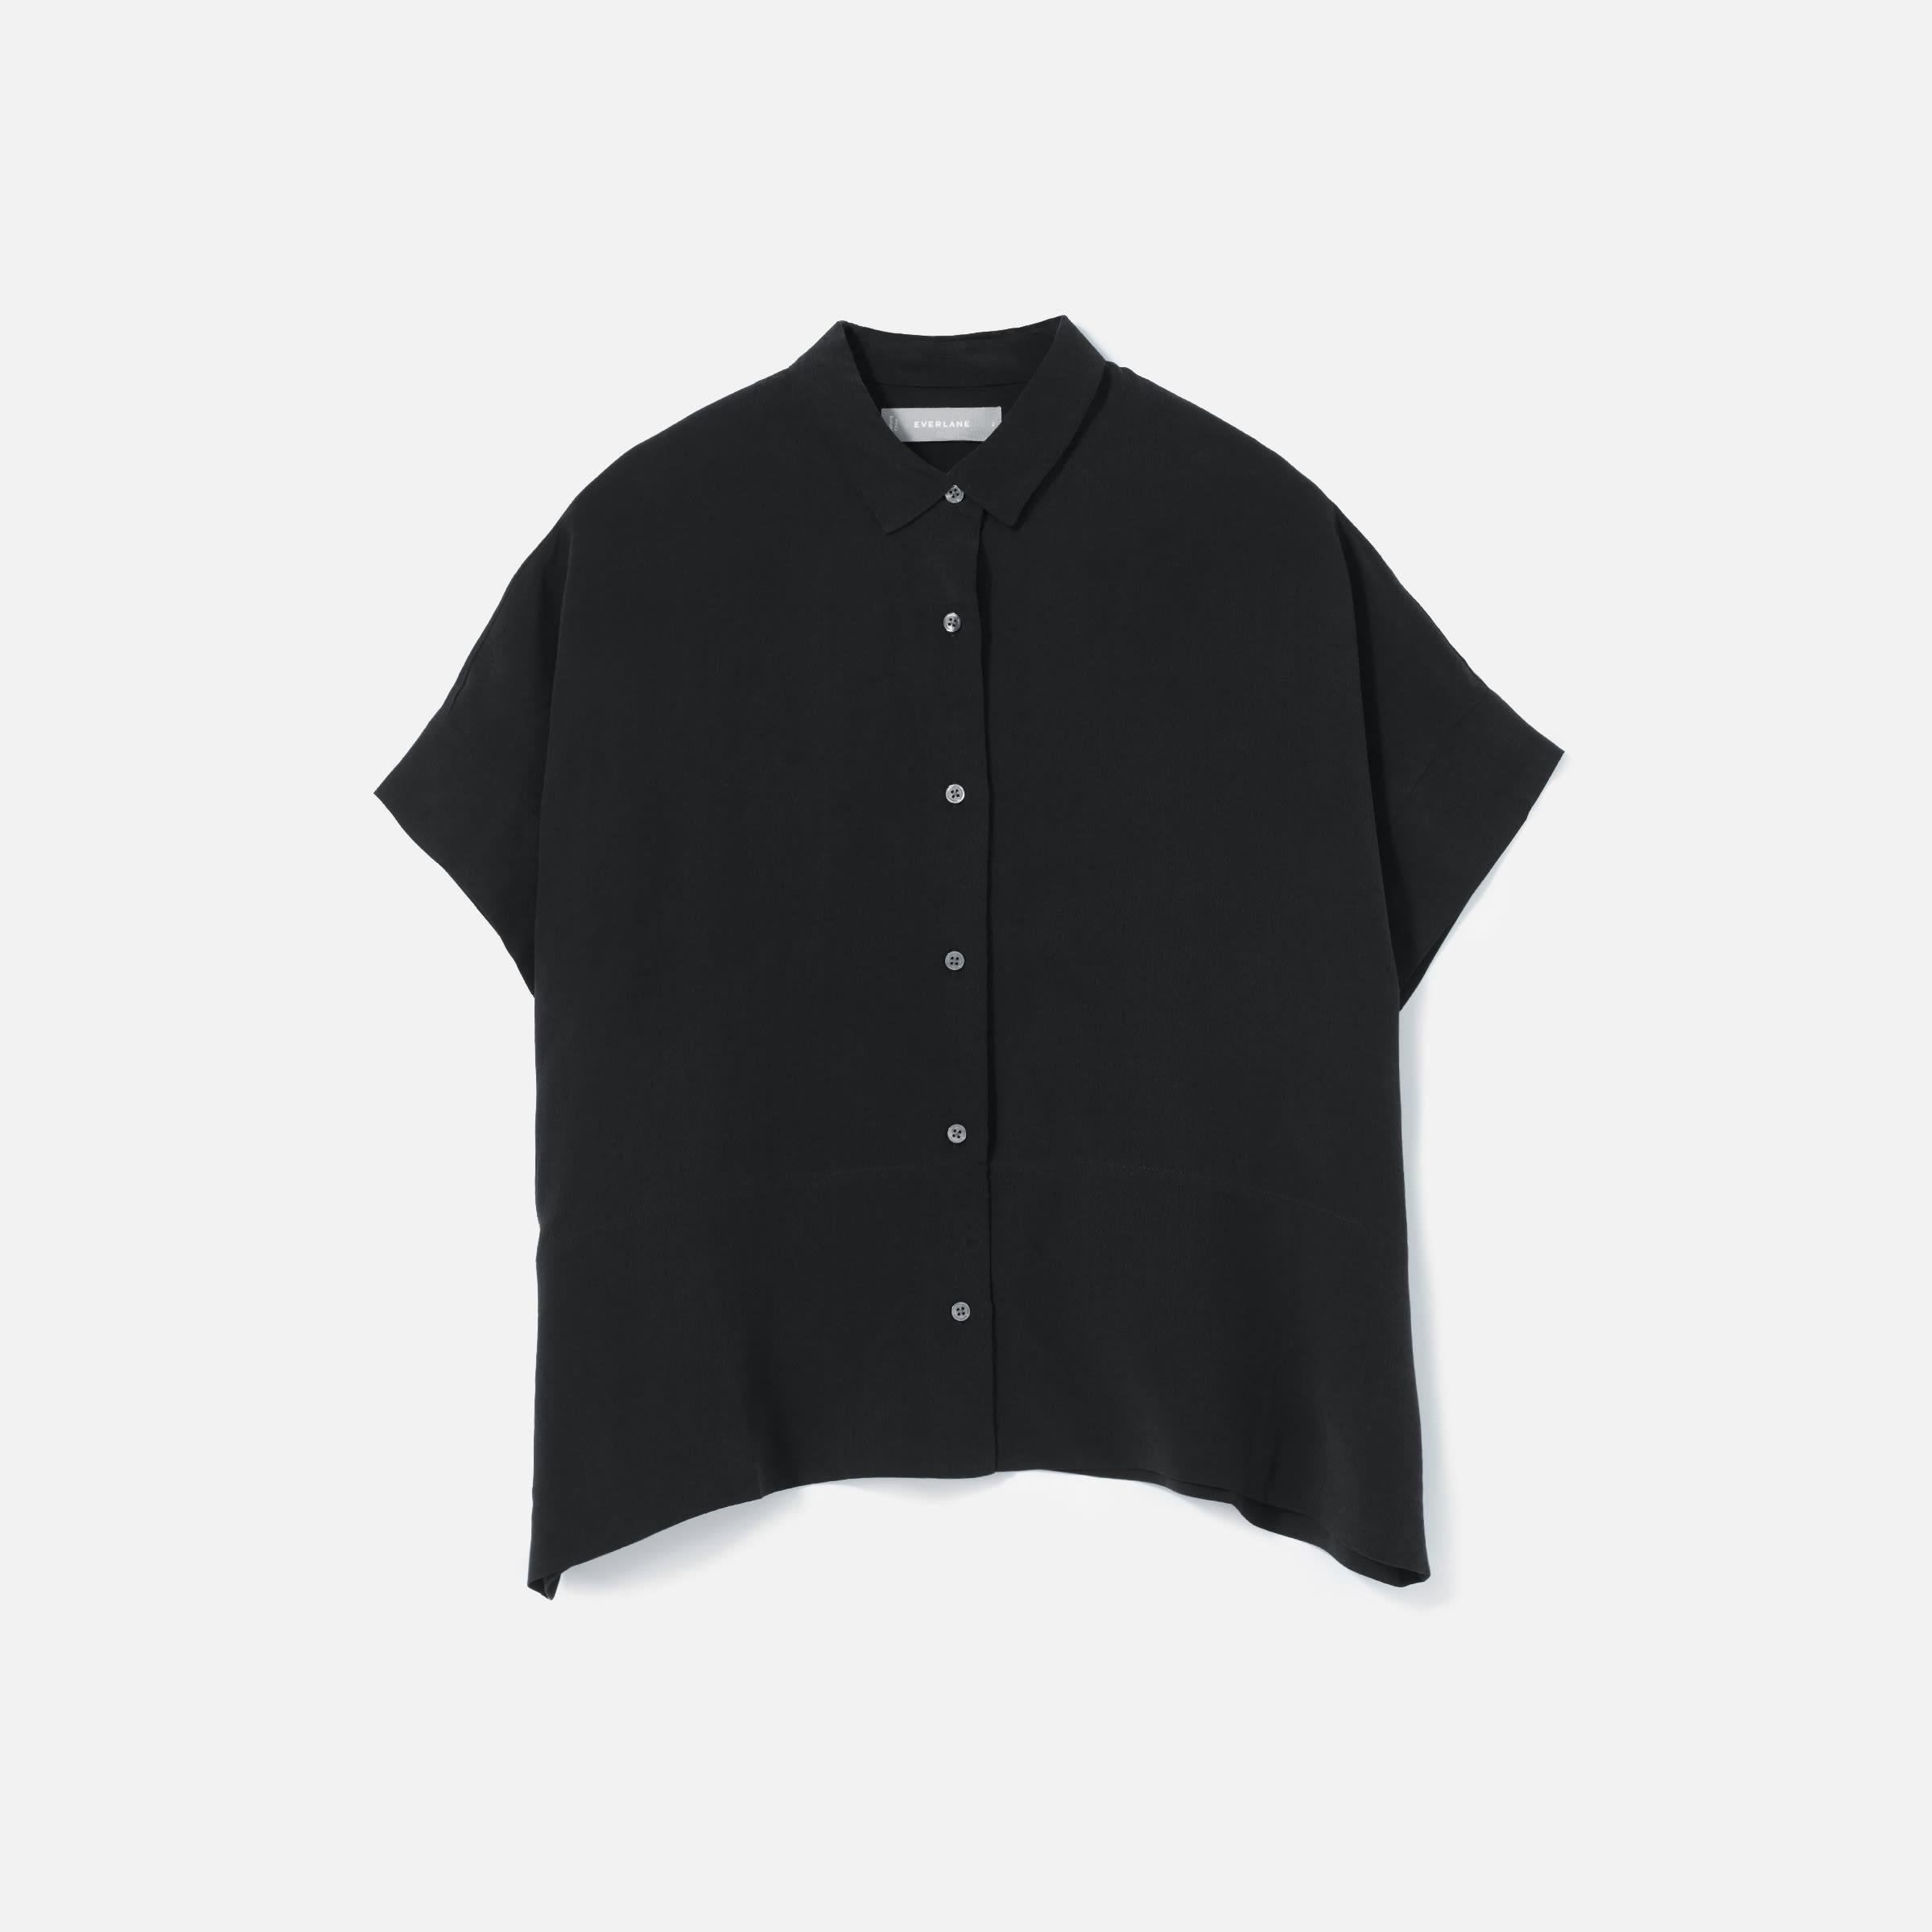 The Washable Clean Silk Short-Sleeve Square Shirt by EVERLANE